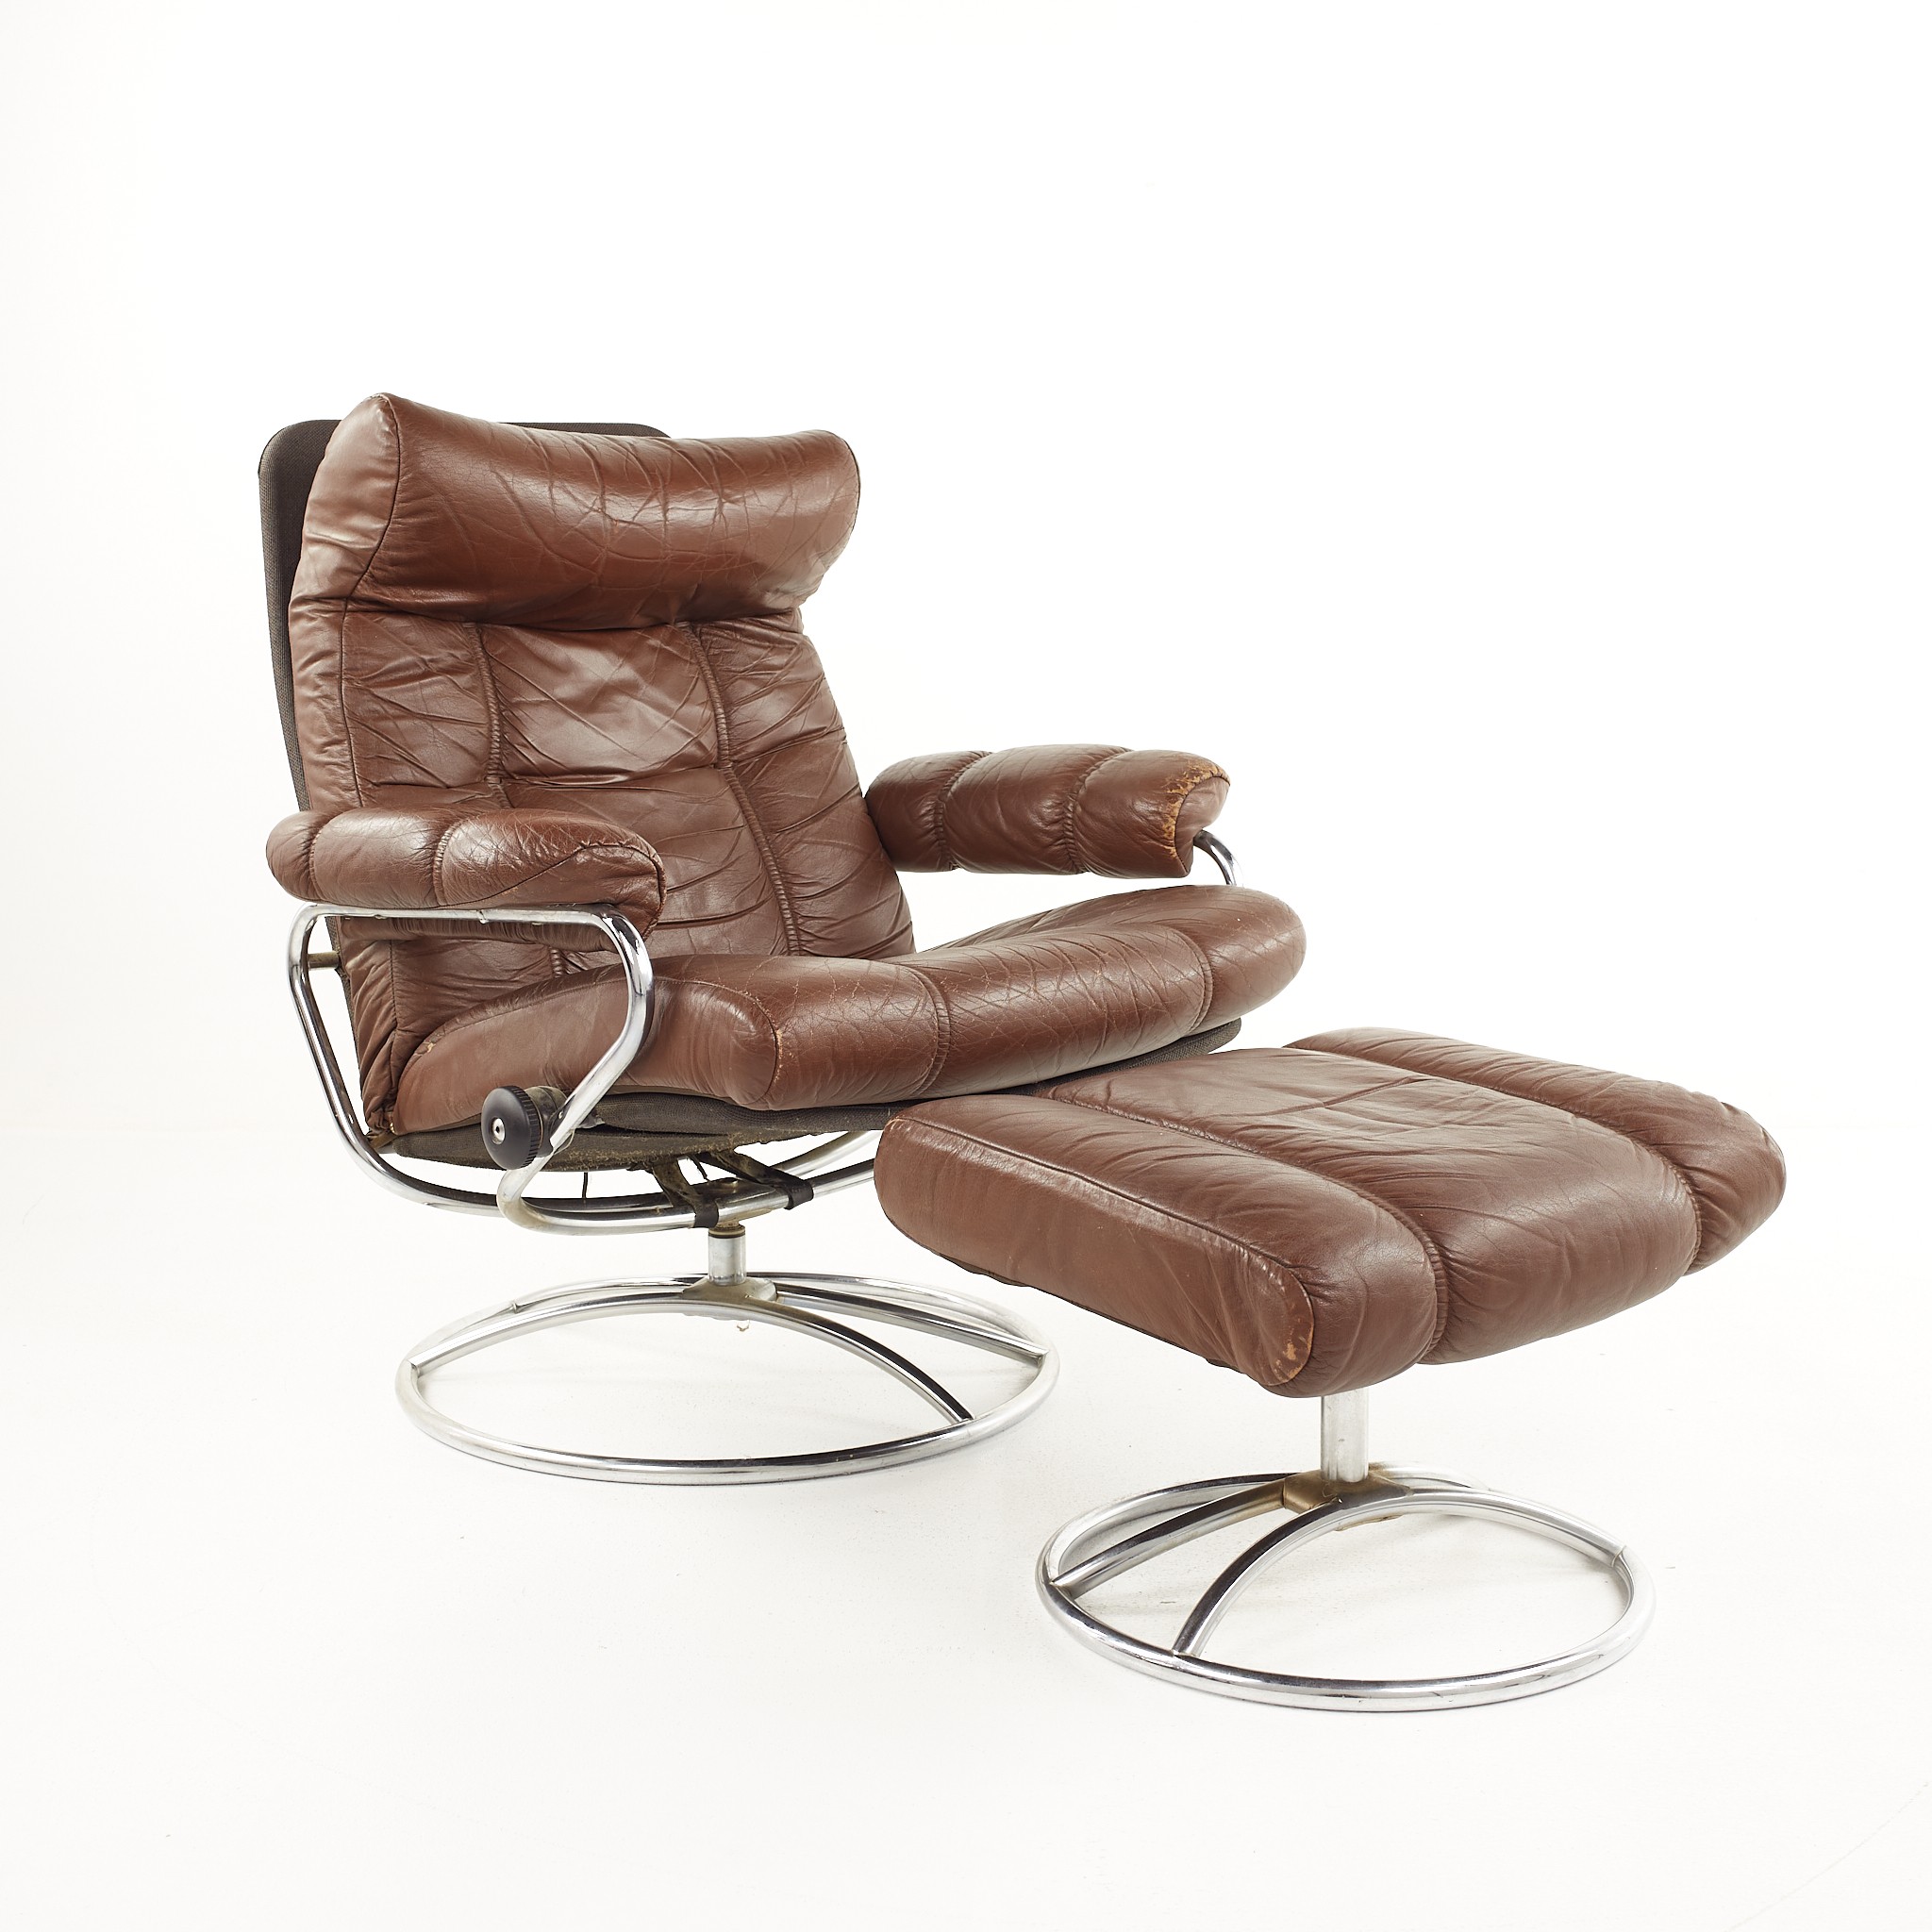 Ekornes Mid Century Chrome and Leather Stressless Lounge Chair and Ottoman